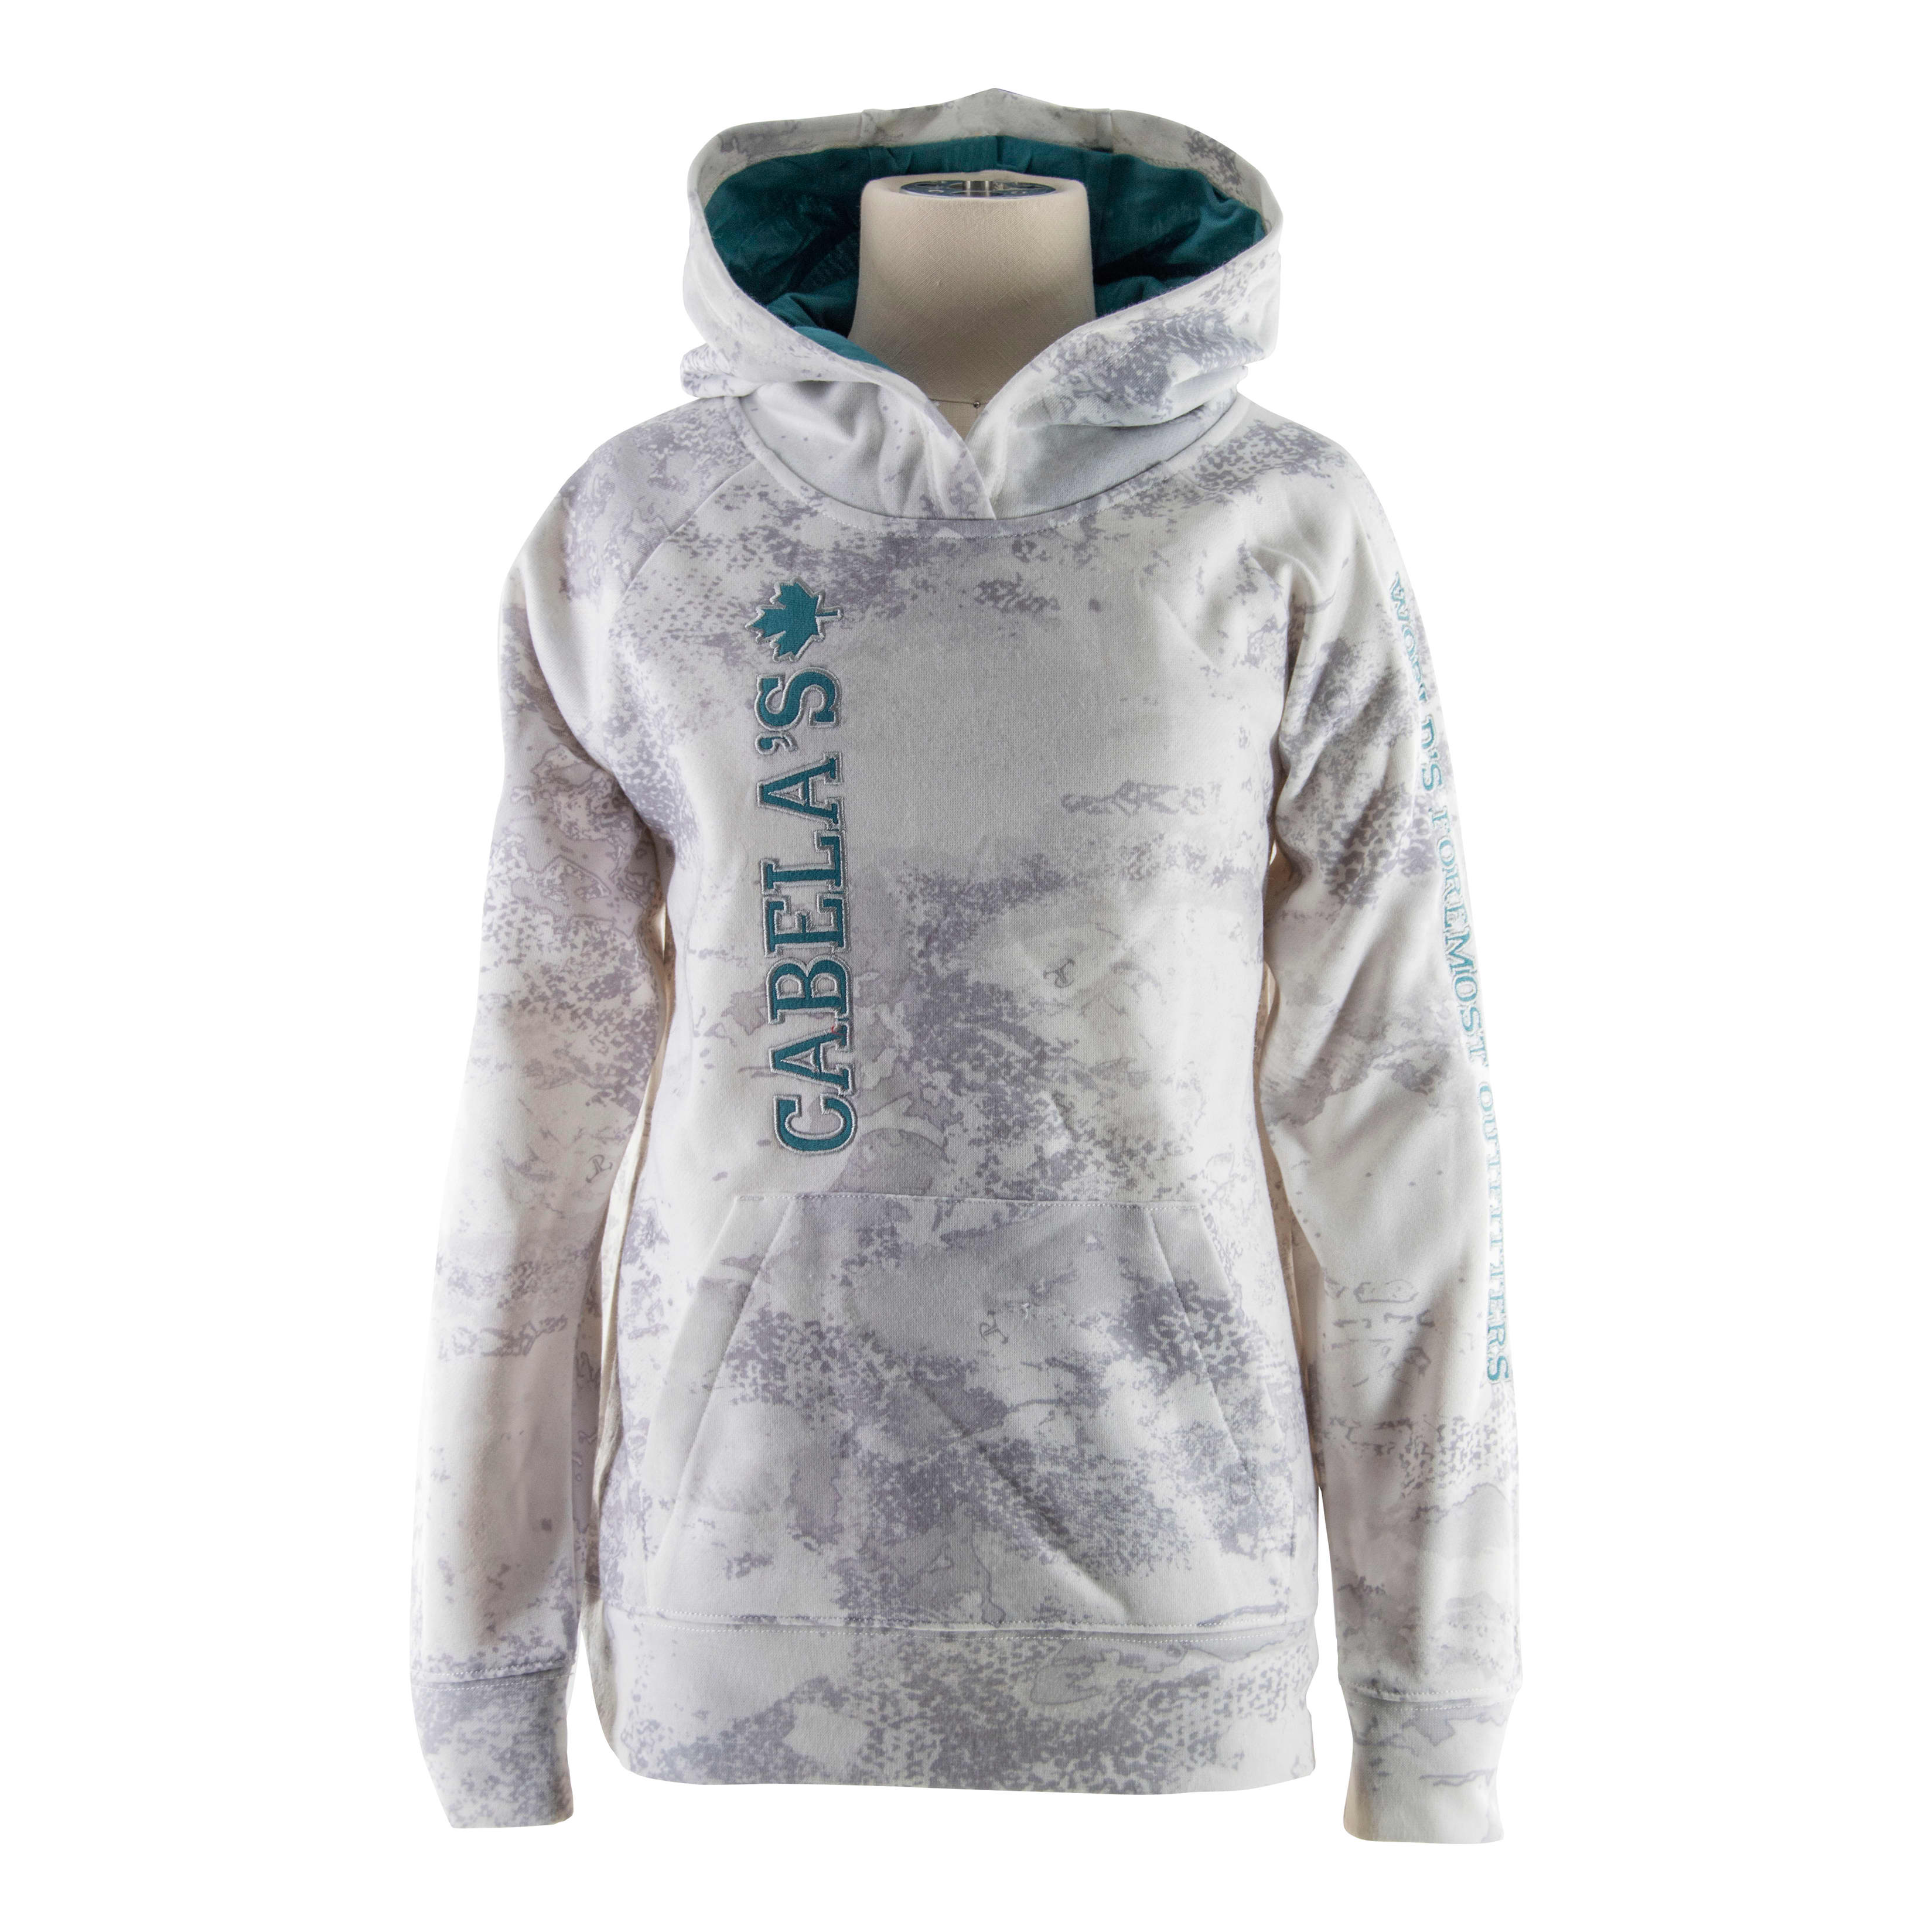 Cabela’s Canada Girls’ Opening Day Hoodie III - Cabela's O2 Snow